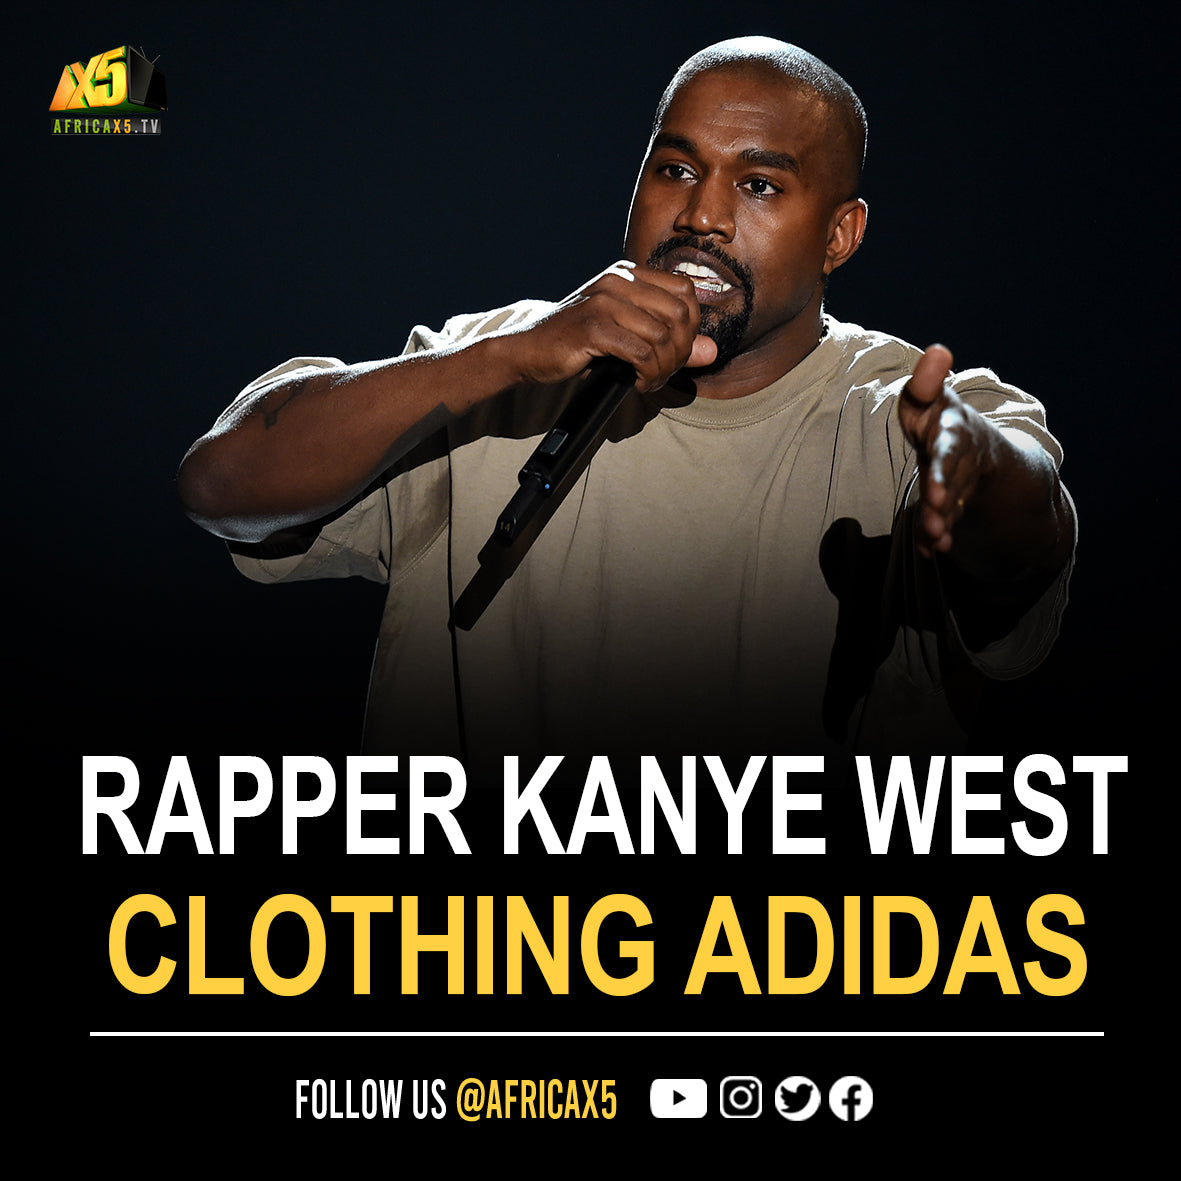 Clothing giant Adidas has cut ties with rapper Ye, known as Kanye West, saying it does "not tolerate antisemitism and any other sort of hate speech